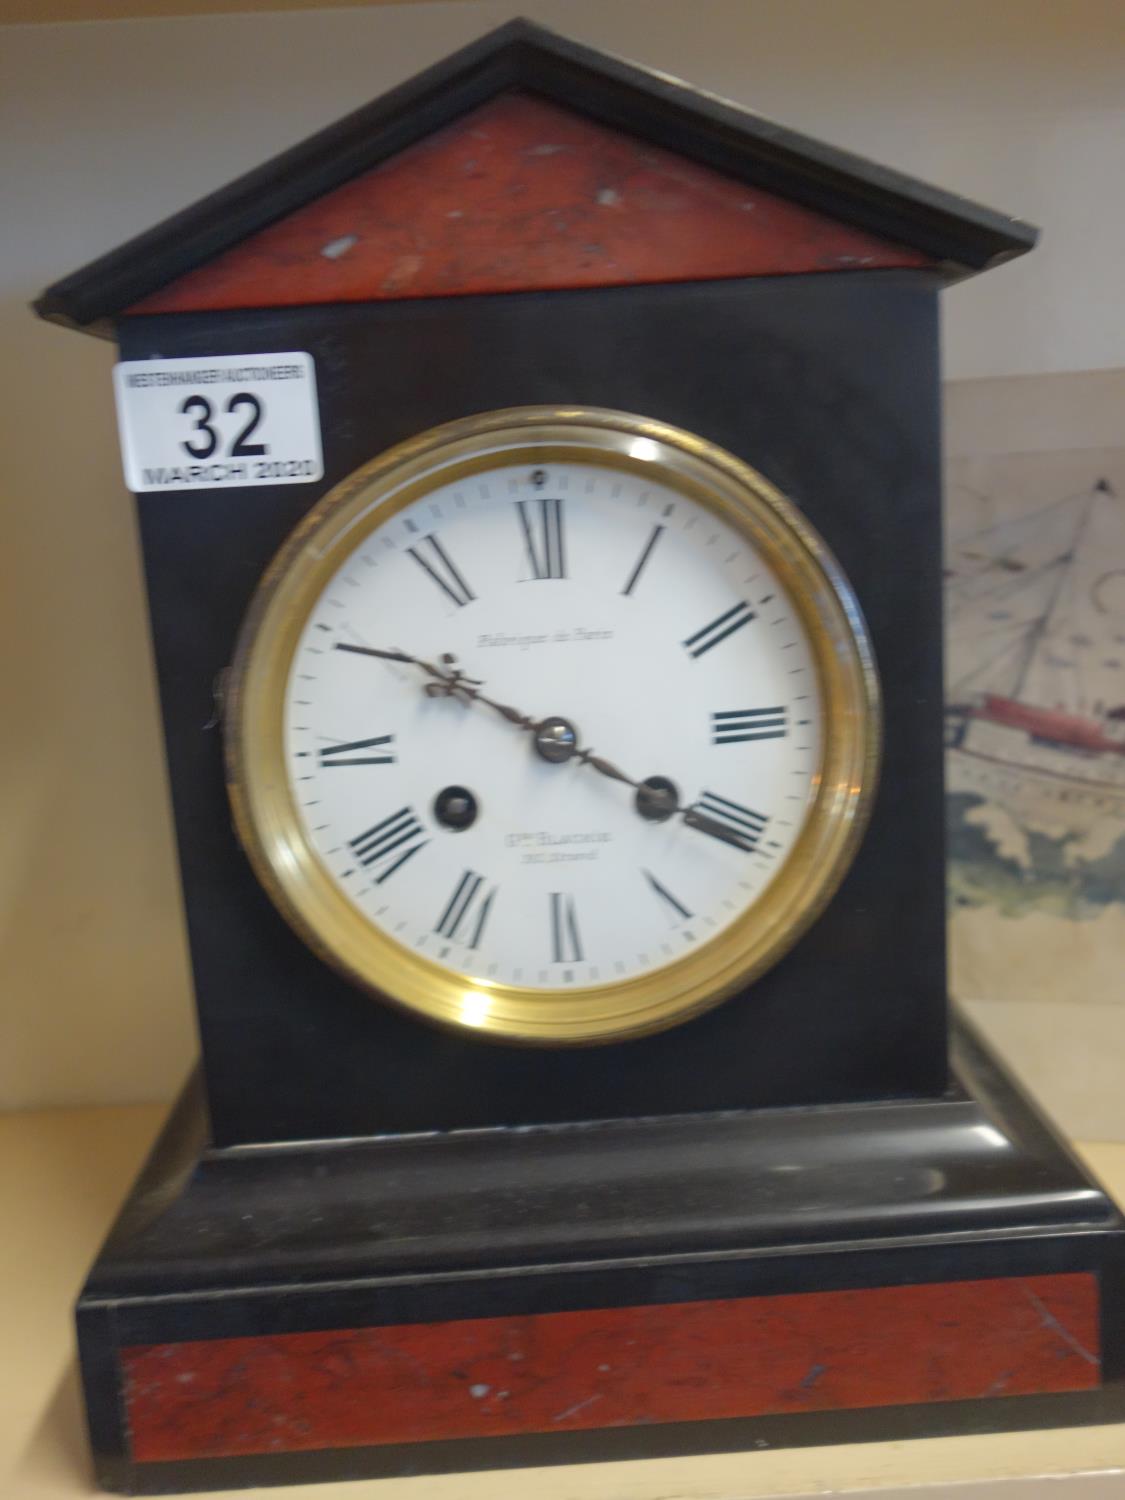 Marble french 8 day clock striking on a bell 10" tall supplied by George Blackie of the Strand